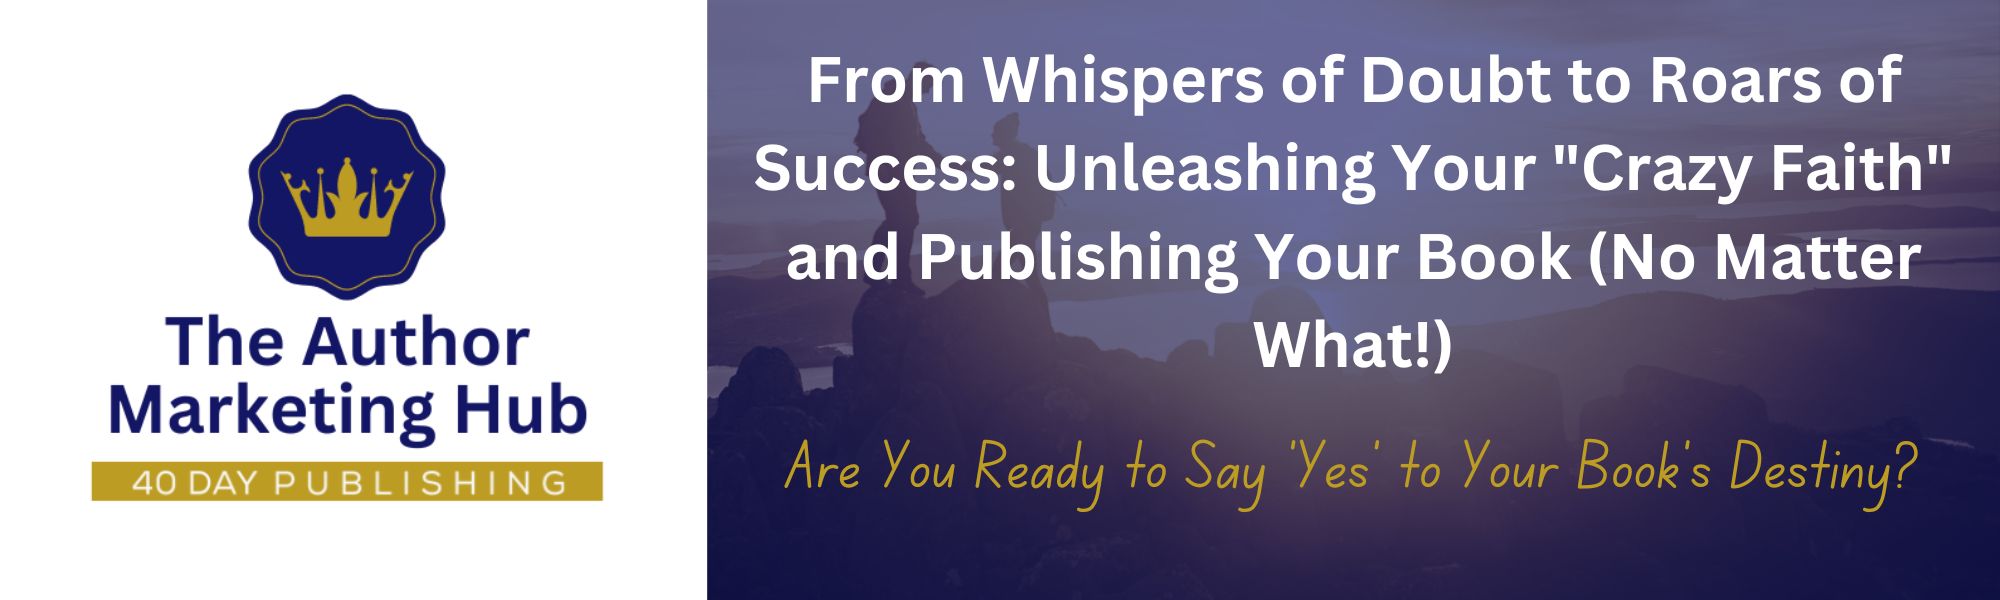 From Whispers of Doubt to Roars of Success